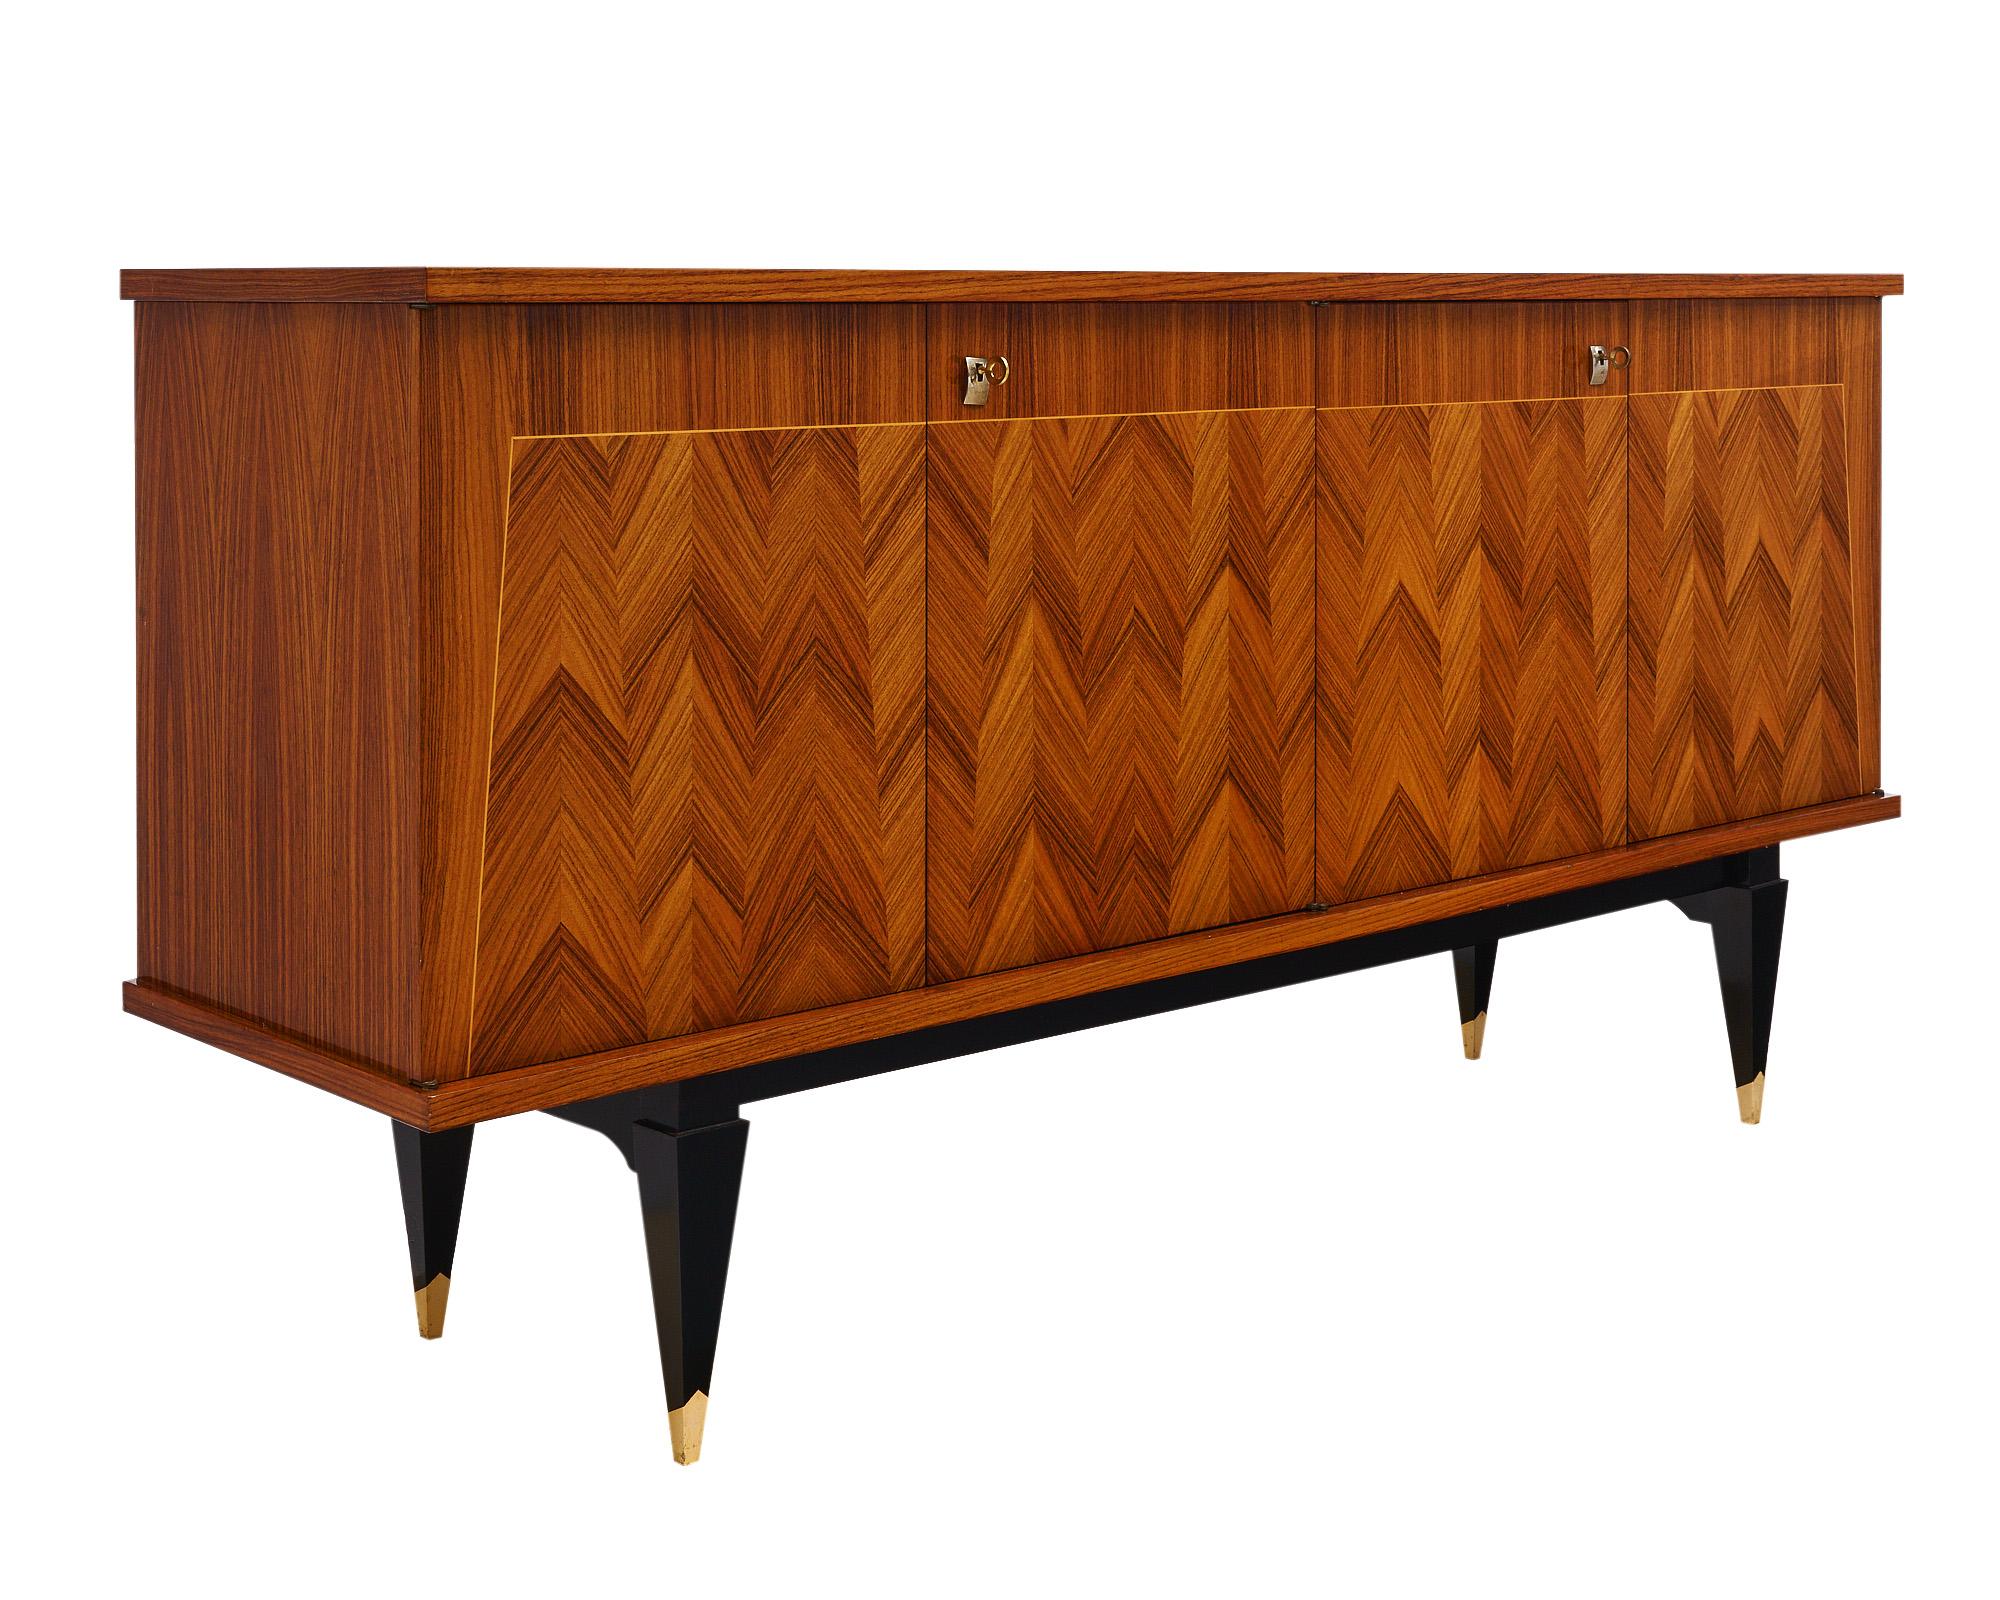 Buffet from mid-century France made with a Rosewood veneer in a striking chevron pattern. There is an ebonized base with four tapered legs capped in brass. There are four doors that open to reveal a lemon wood interior with shelves and two